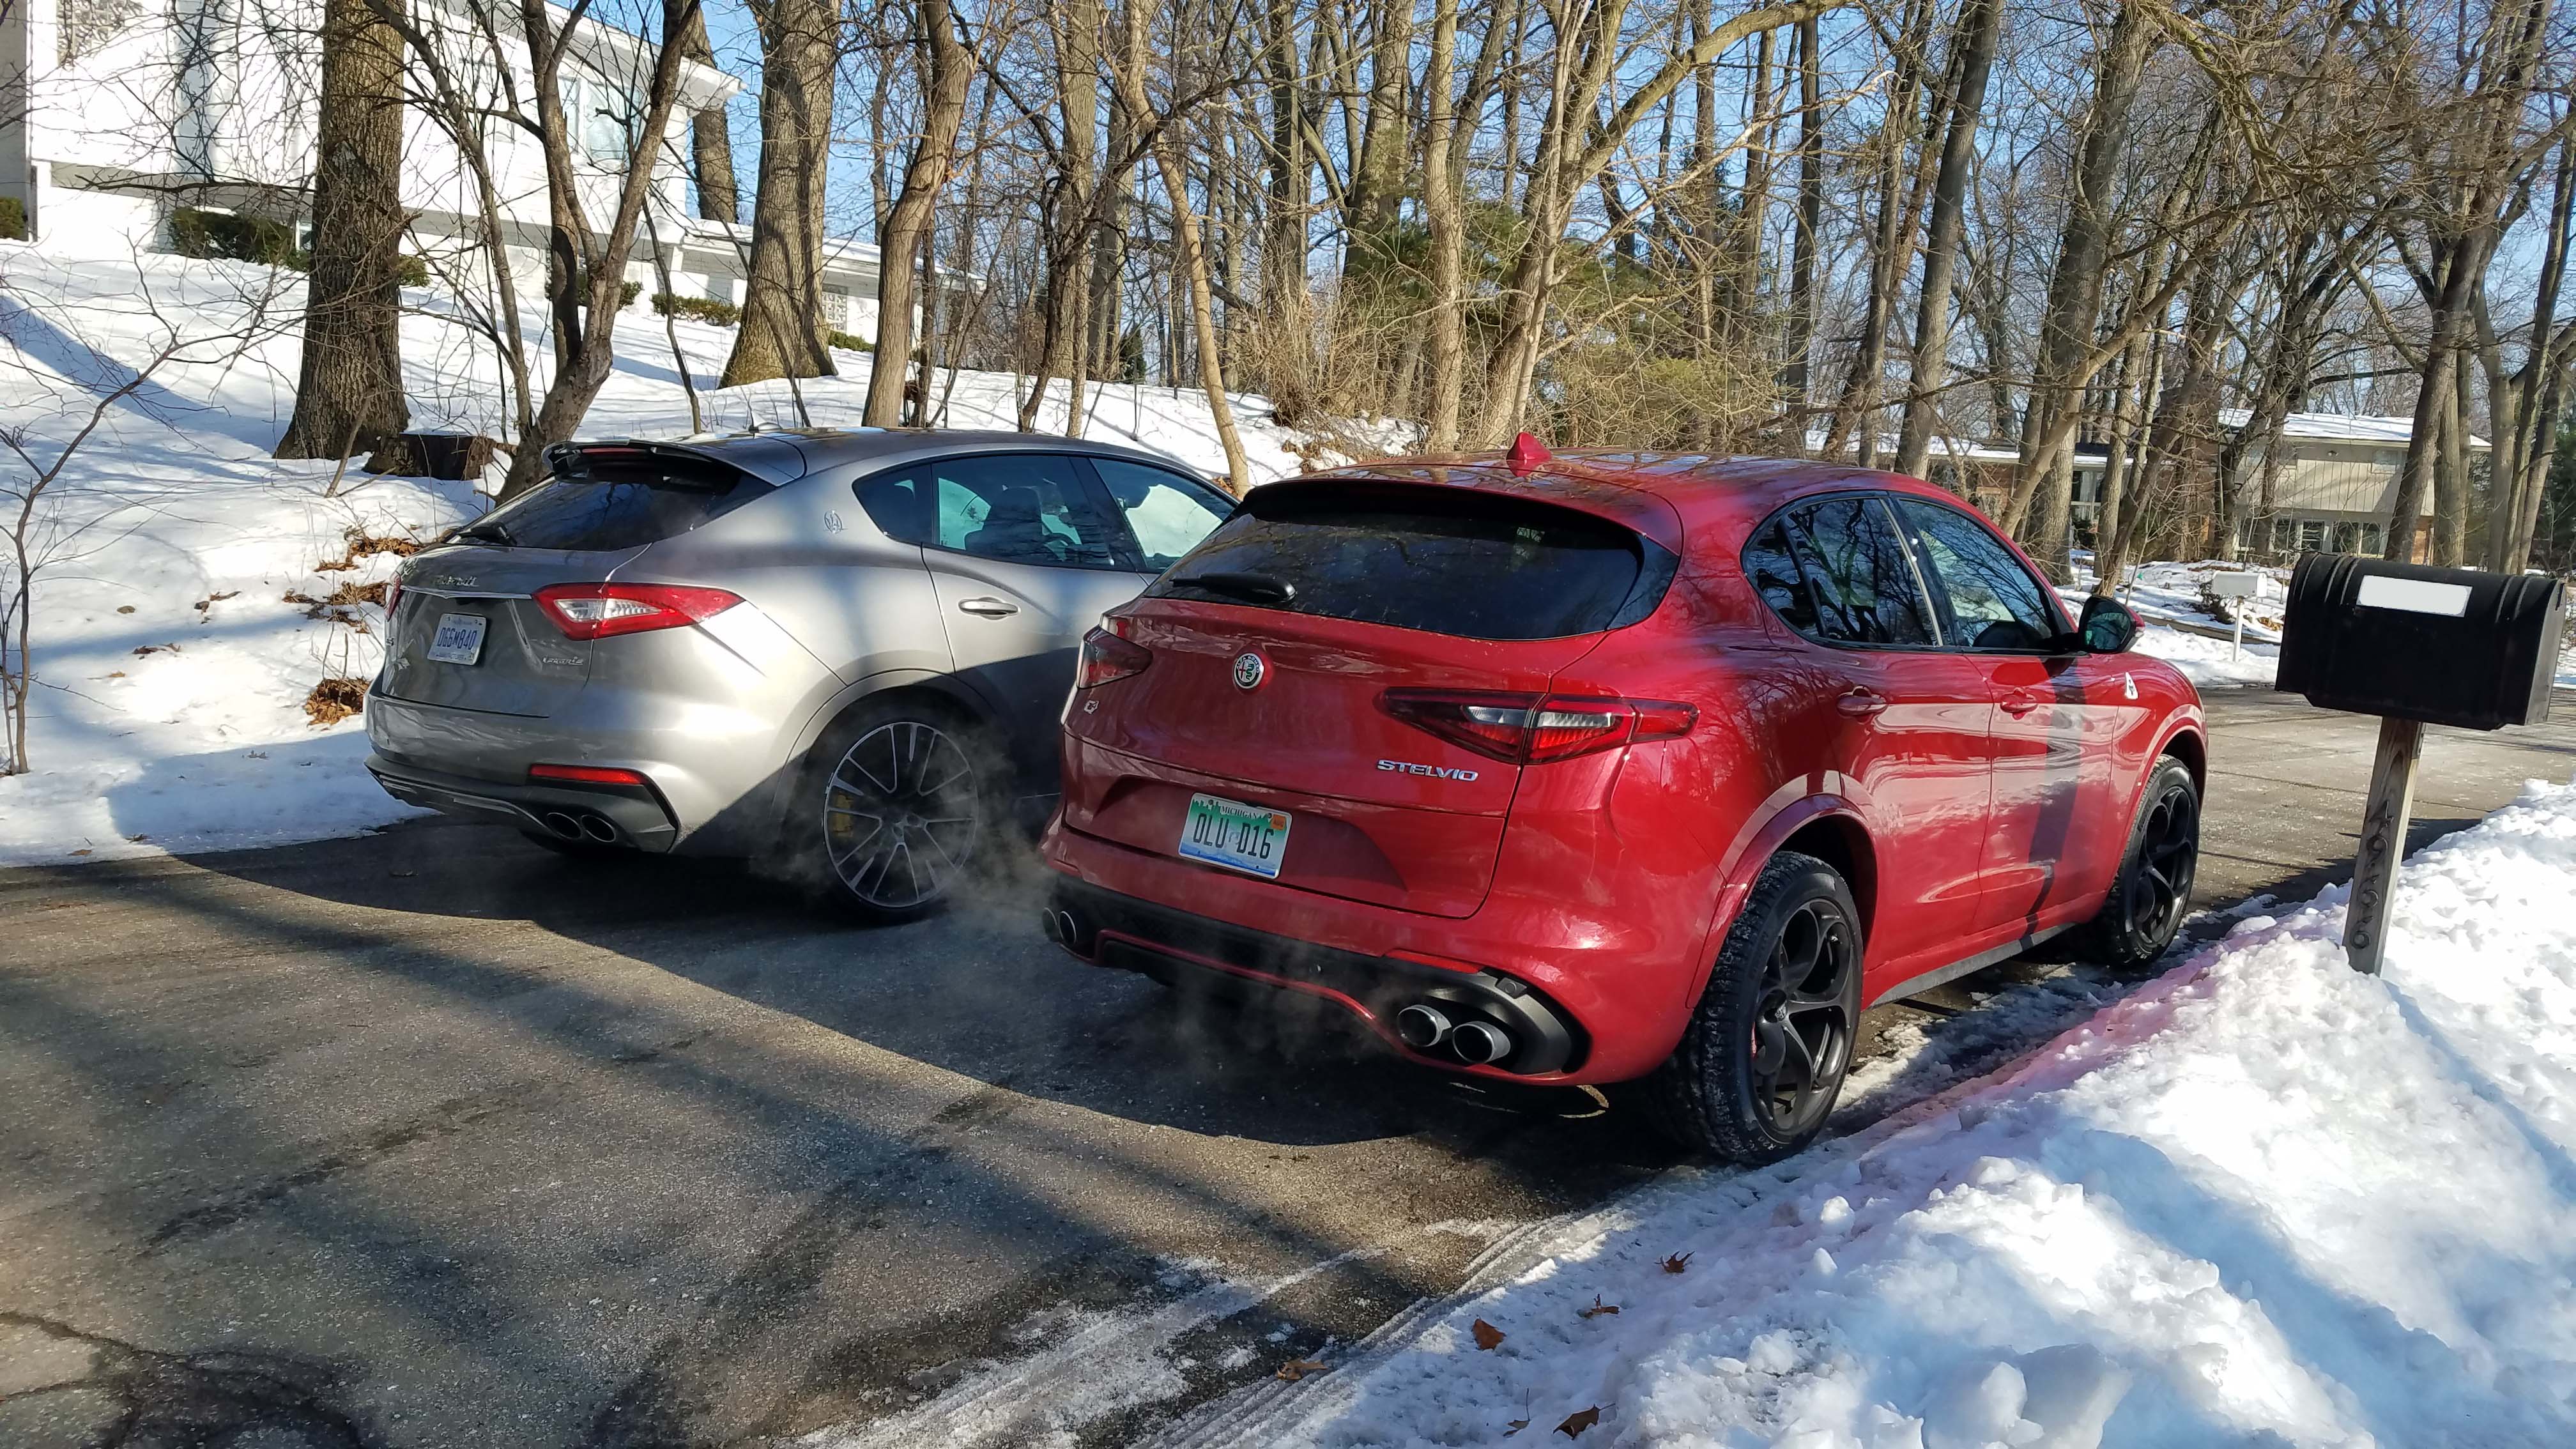 Quad-piped hellions. The Alfa Romeo Stelvio Quadrifoglio, right, and Maserati Levante look like any other 5-door utes from the rear — but those quad tailpipes hint at the 500-plus horsepower in the bow.